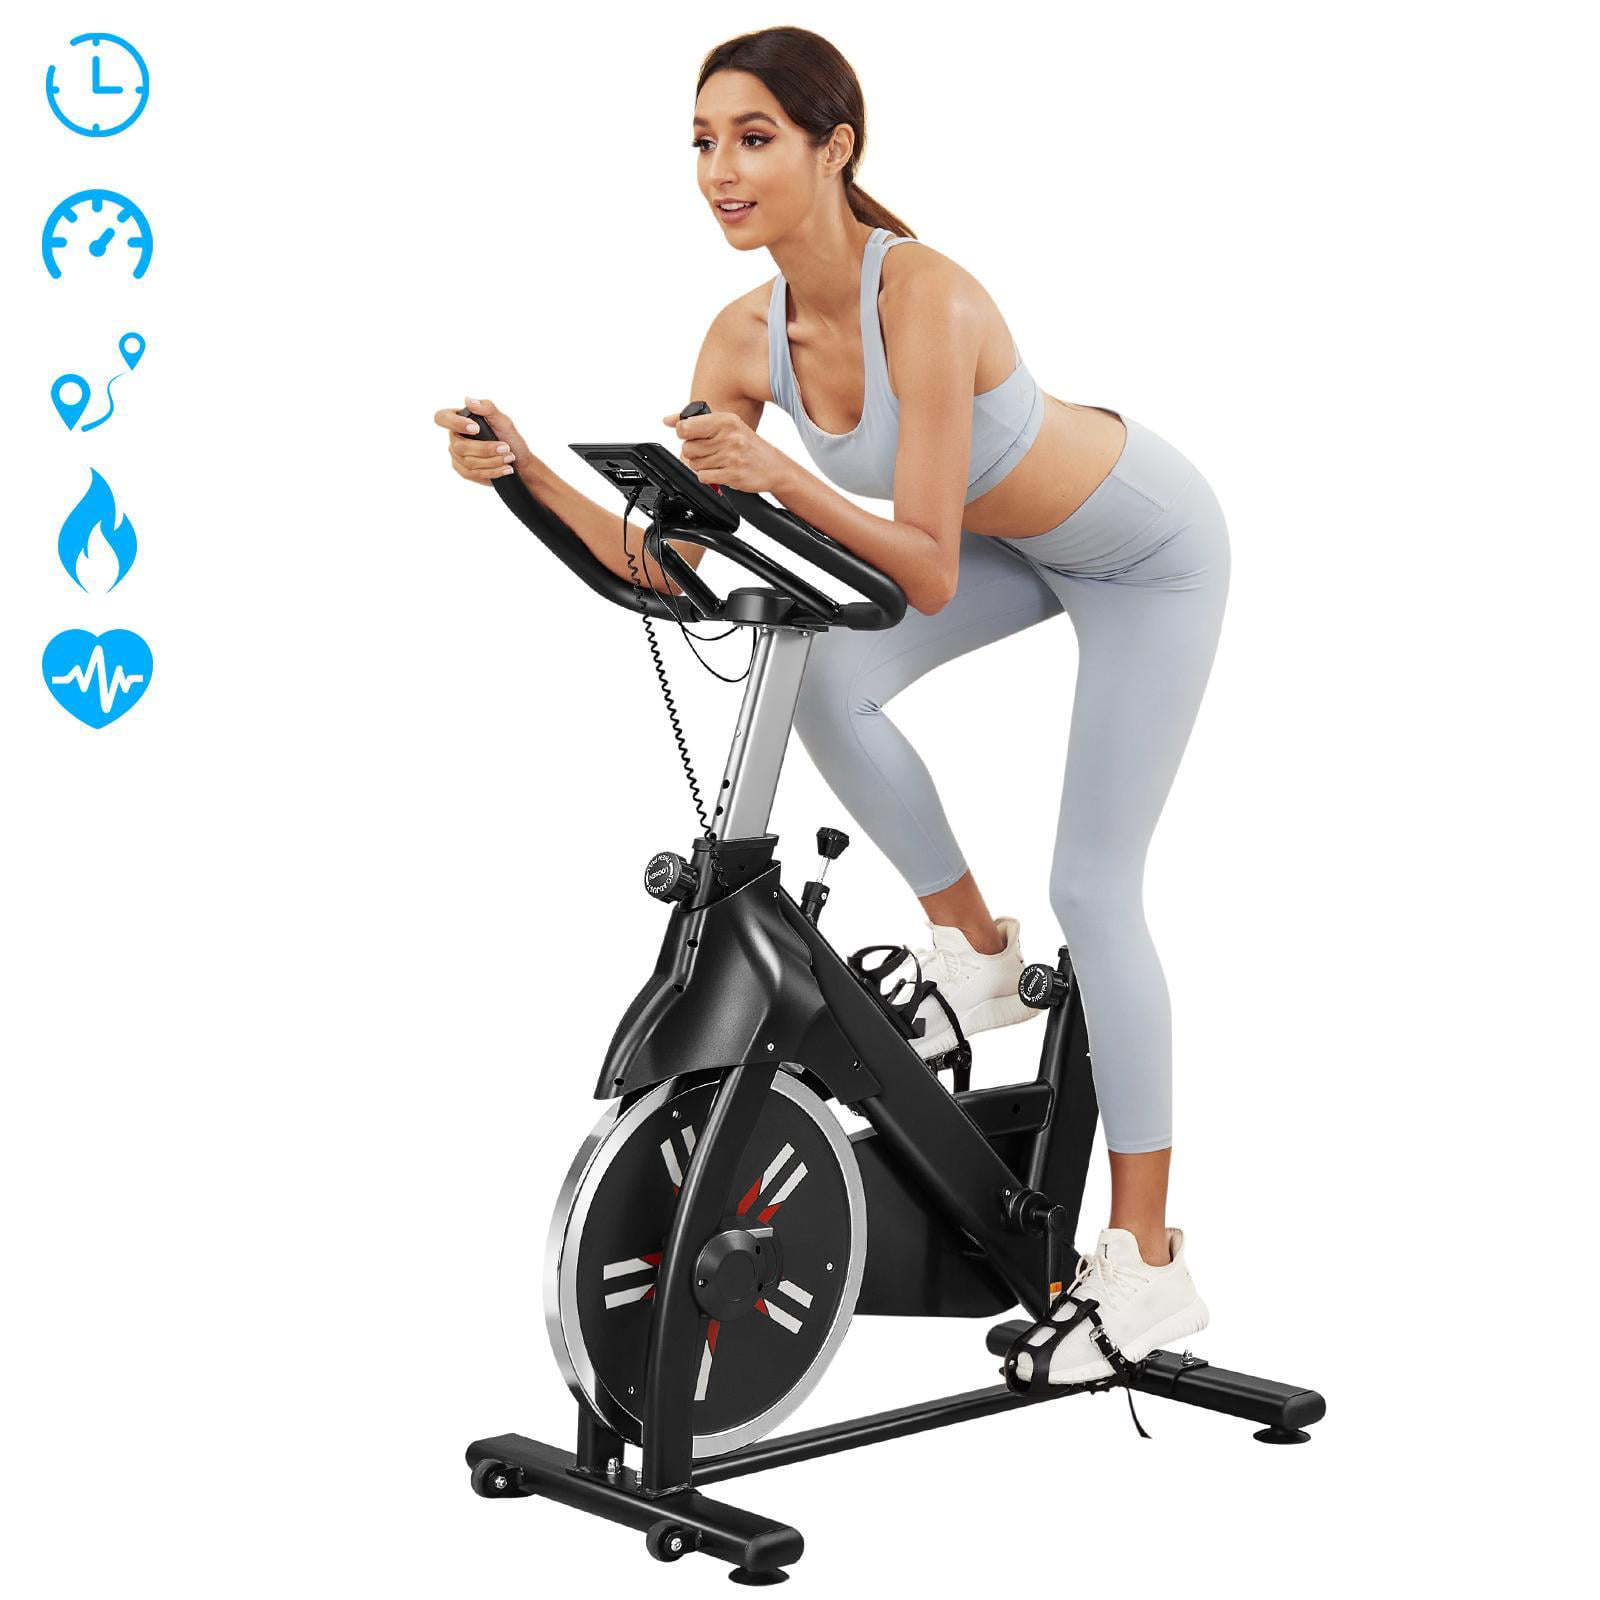 Details about   Portable Cardio Gym Fitness Workout Hand Foot Pedal Mini Exercise Bike Bicycle 